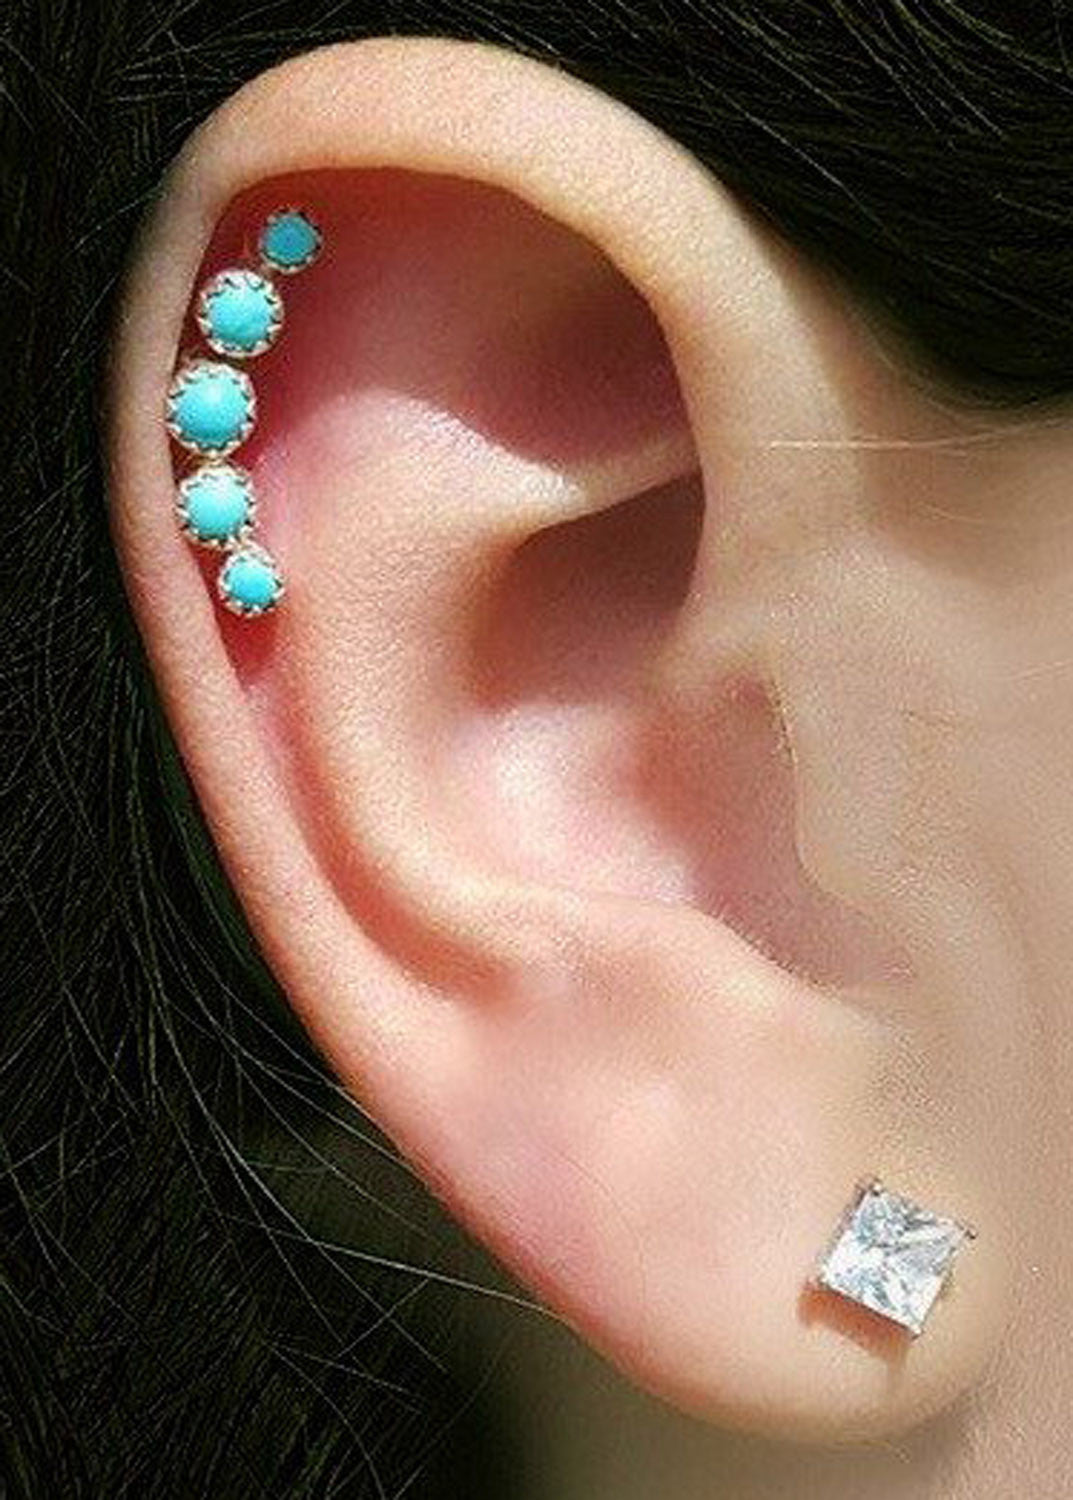 Gorgeous 6 Stone Turquoise Cartilage Piercing Earrings Jewelry at MyBodiArt.com 